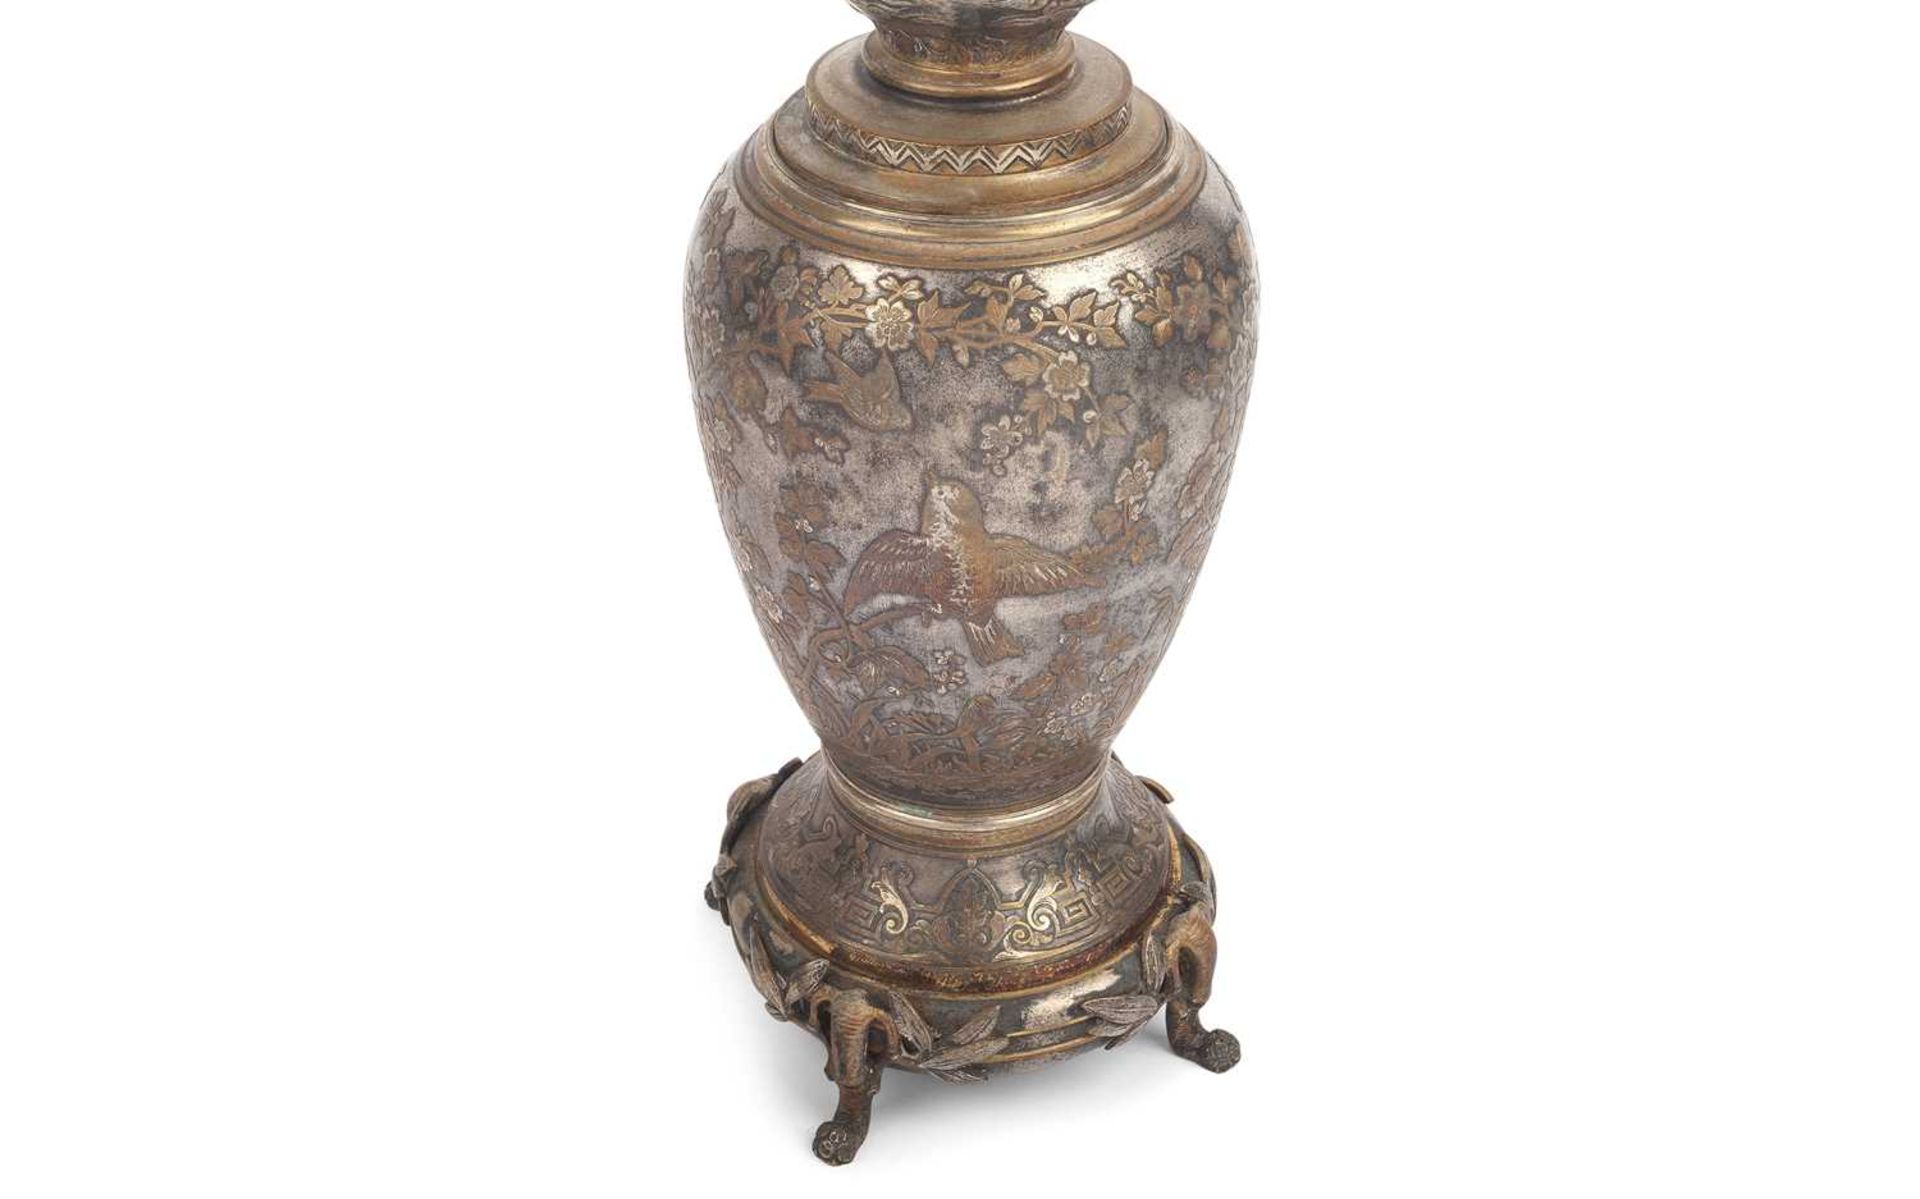 MANNER OF CHRISTOFLE & CIE: A FINE 19TH CENTURY FRENCH JAPONISME STYLE SILVERED METAL LAMP BASE - Image 5 of 5